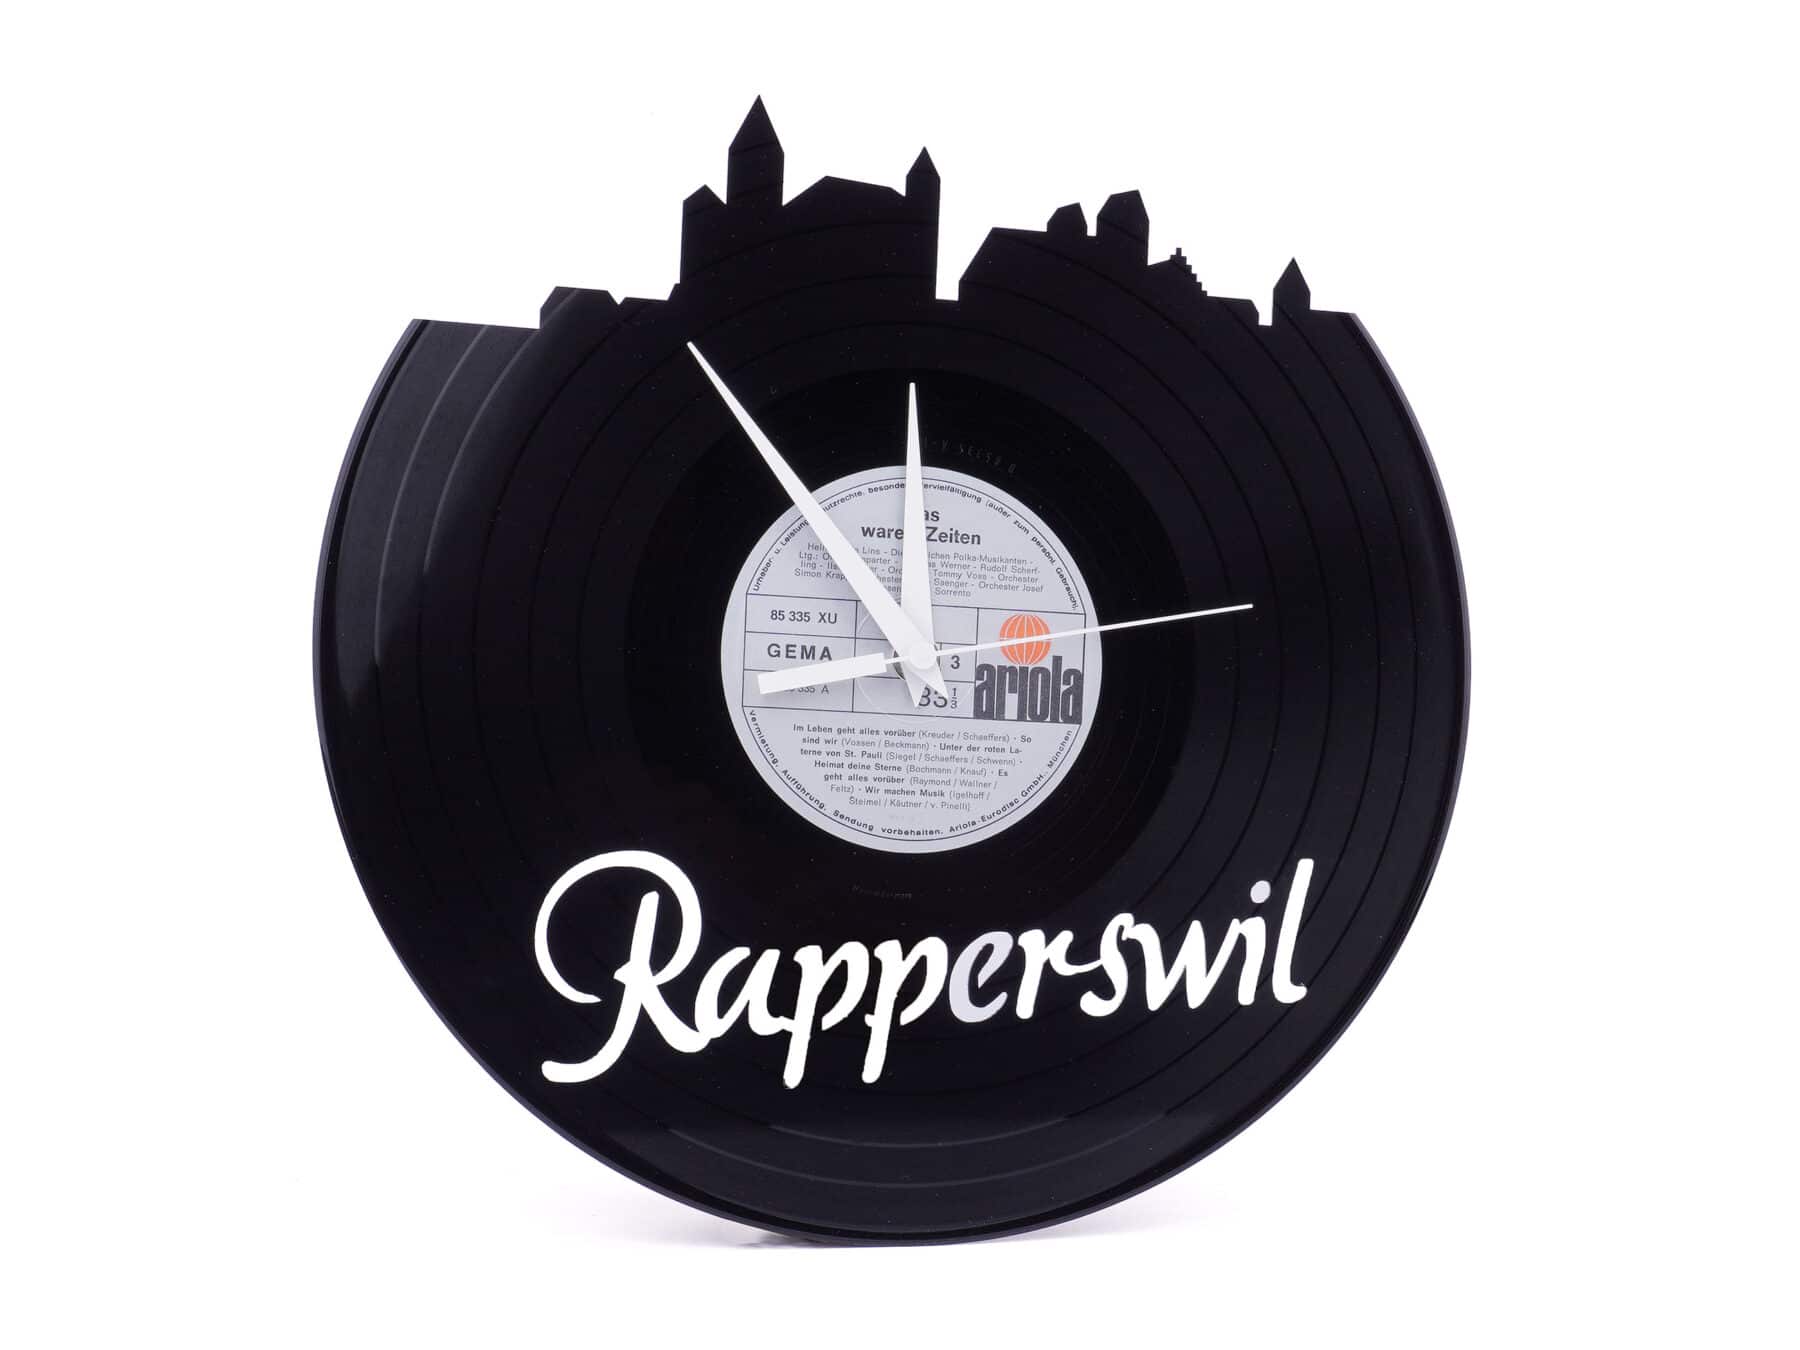 Schallplattenuhr Upcycling Stadt Rapperswil limited edition Kurts.ch